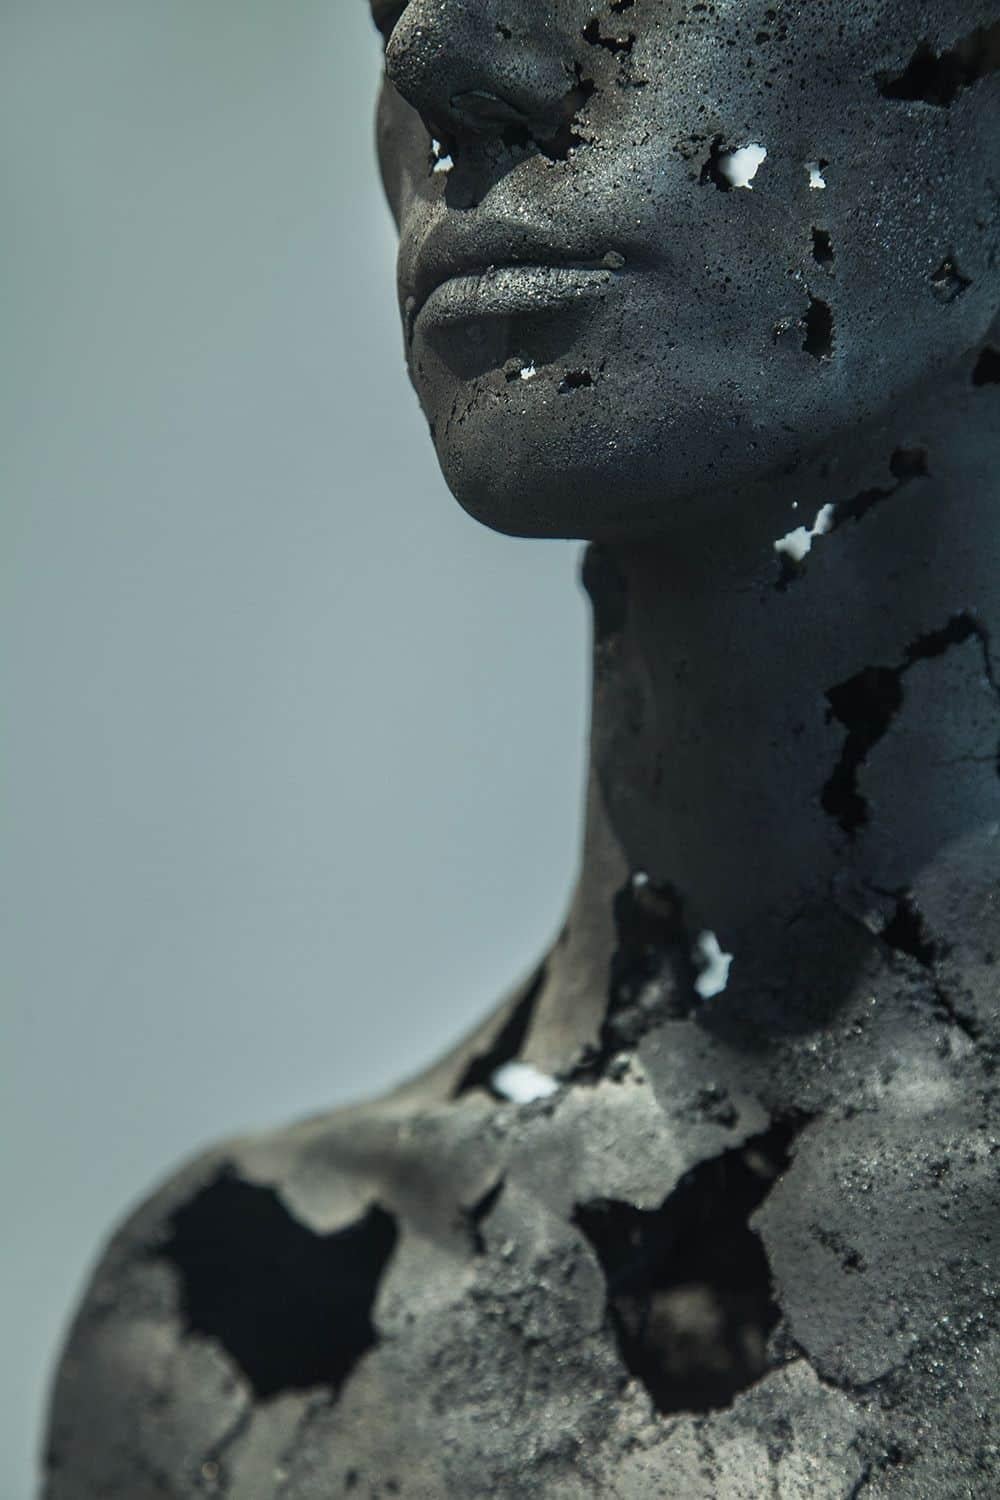 The Presence of Absence - Female (III) by Tom Price - Sculpture de charbon, corps nu en vente 4